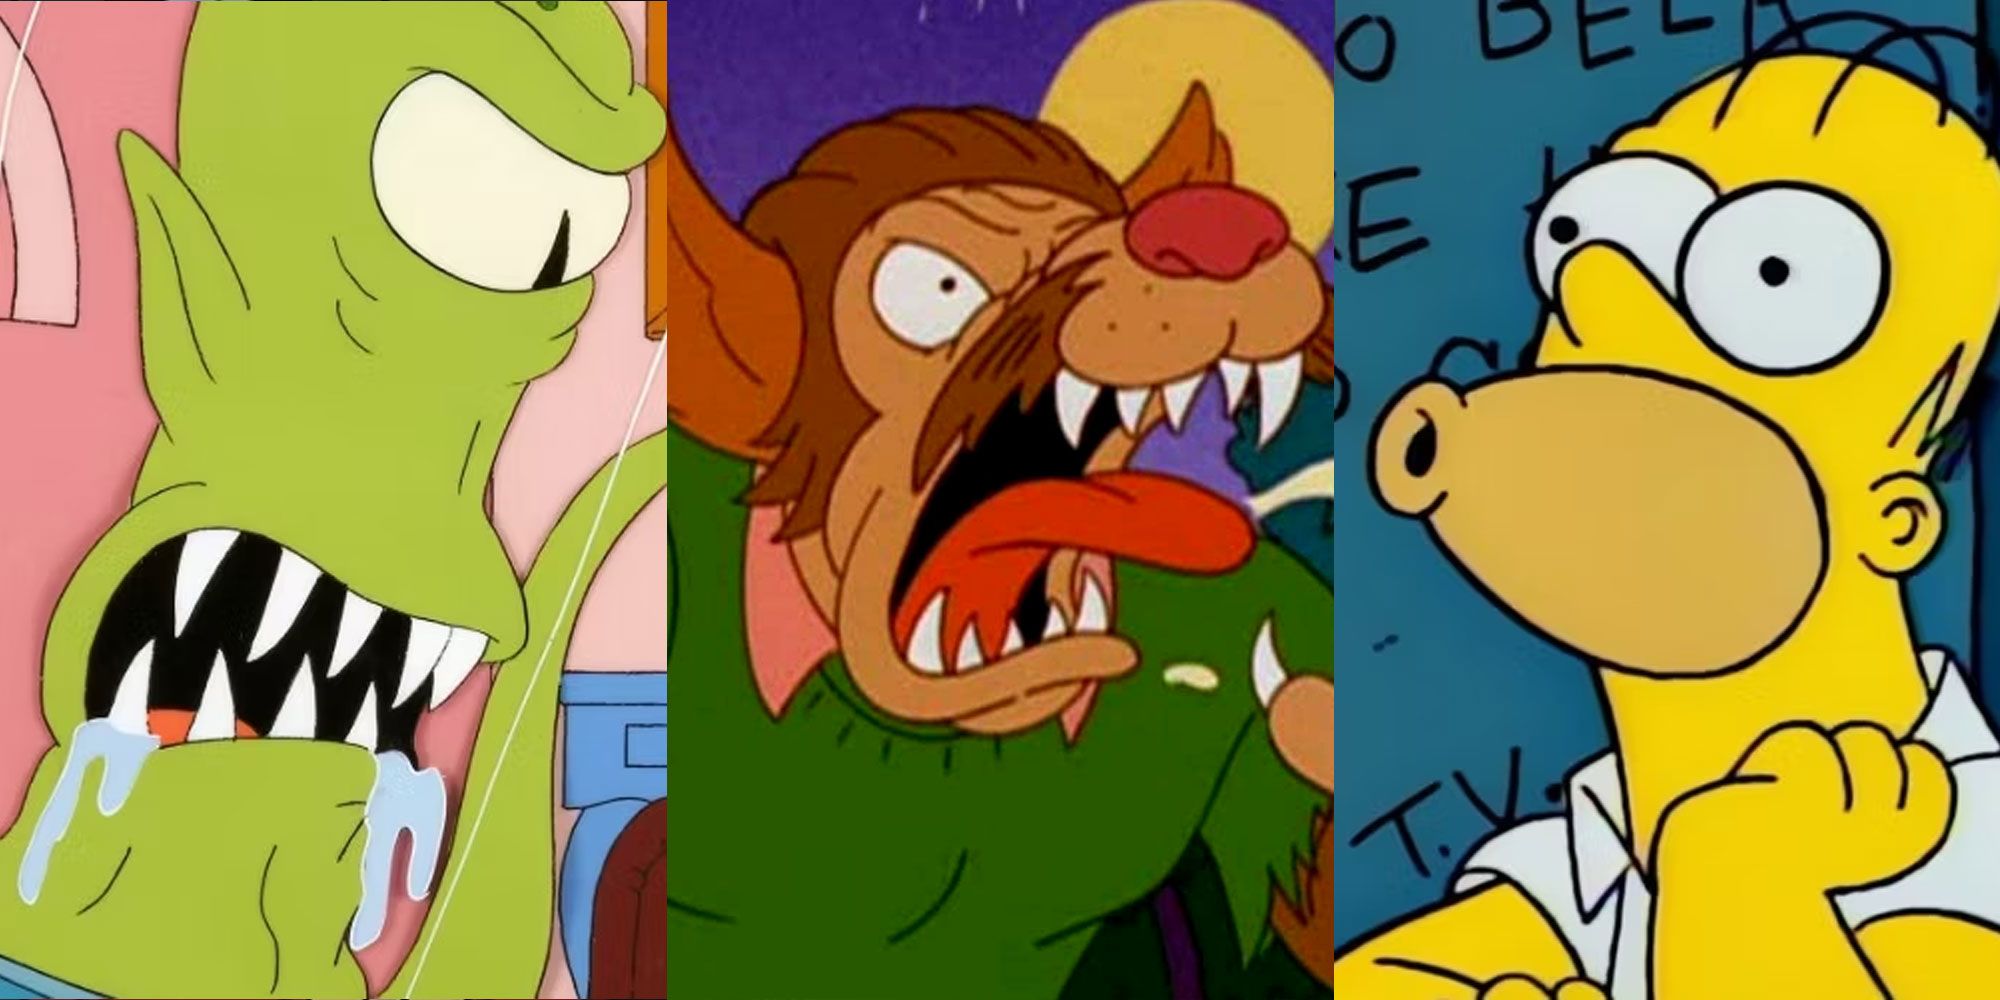 Split image of characters from The Simpsons' Treehouse of Horror episodes